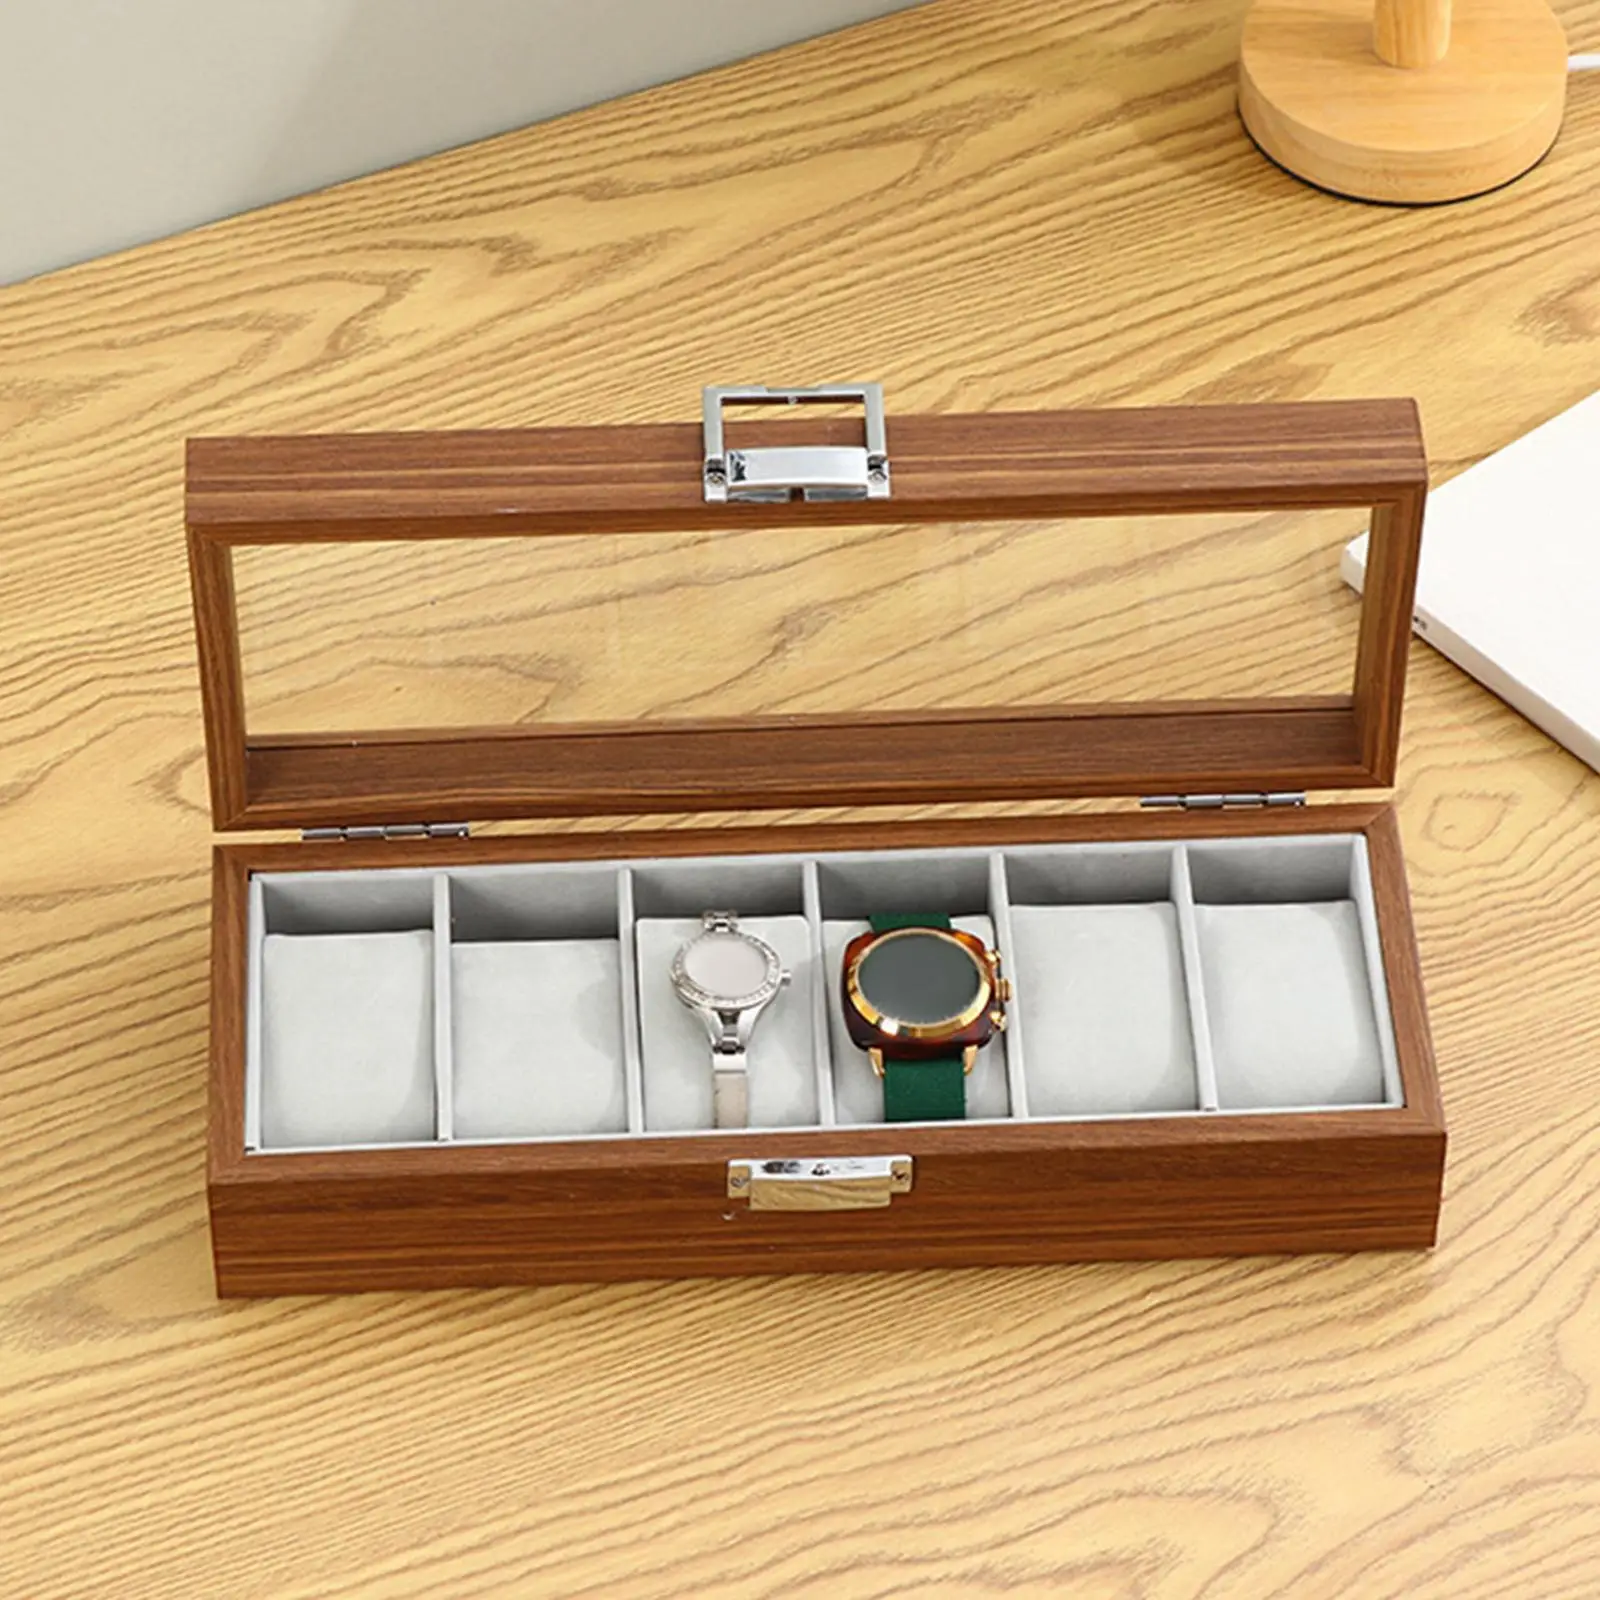 Watch Box Organizer 6 Slots Portable Watch Organizer Holder for Watches Necklace Bracelet Earrings Men and Women Home Decoration